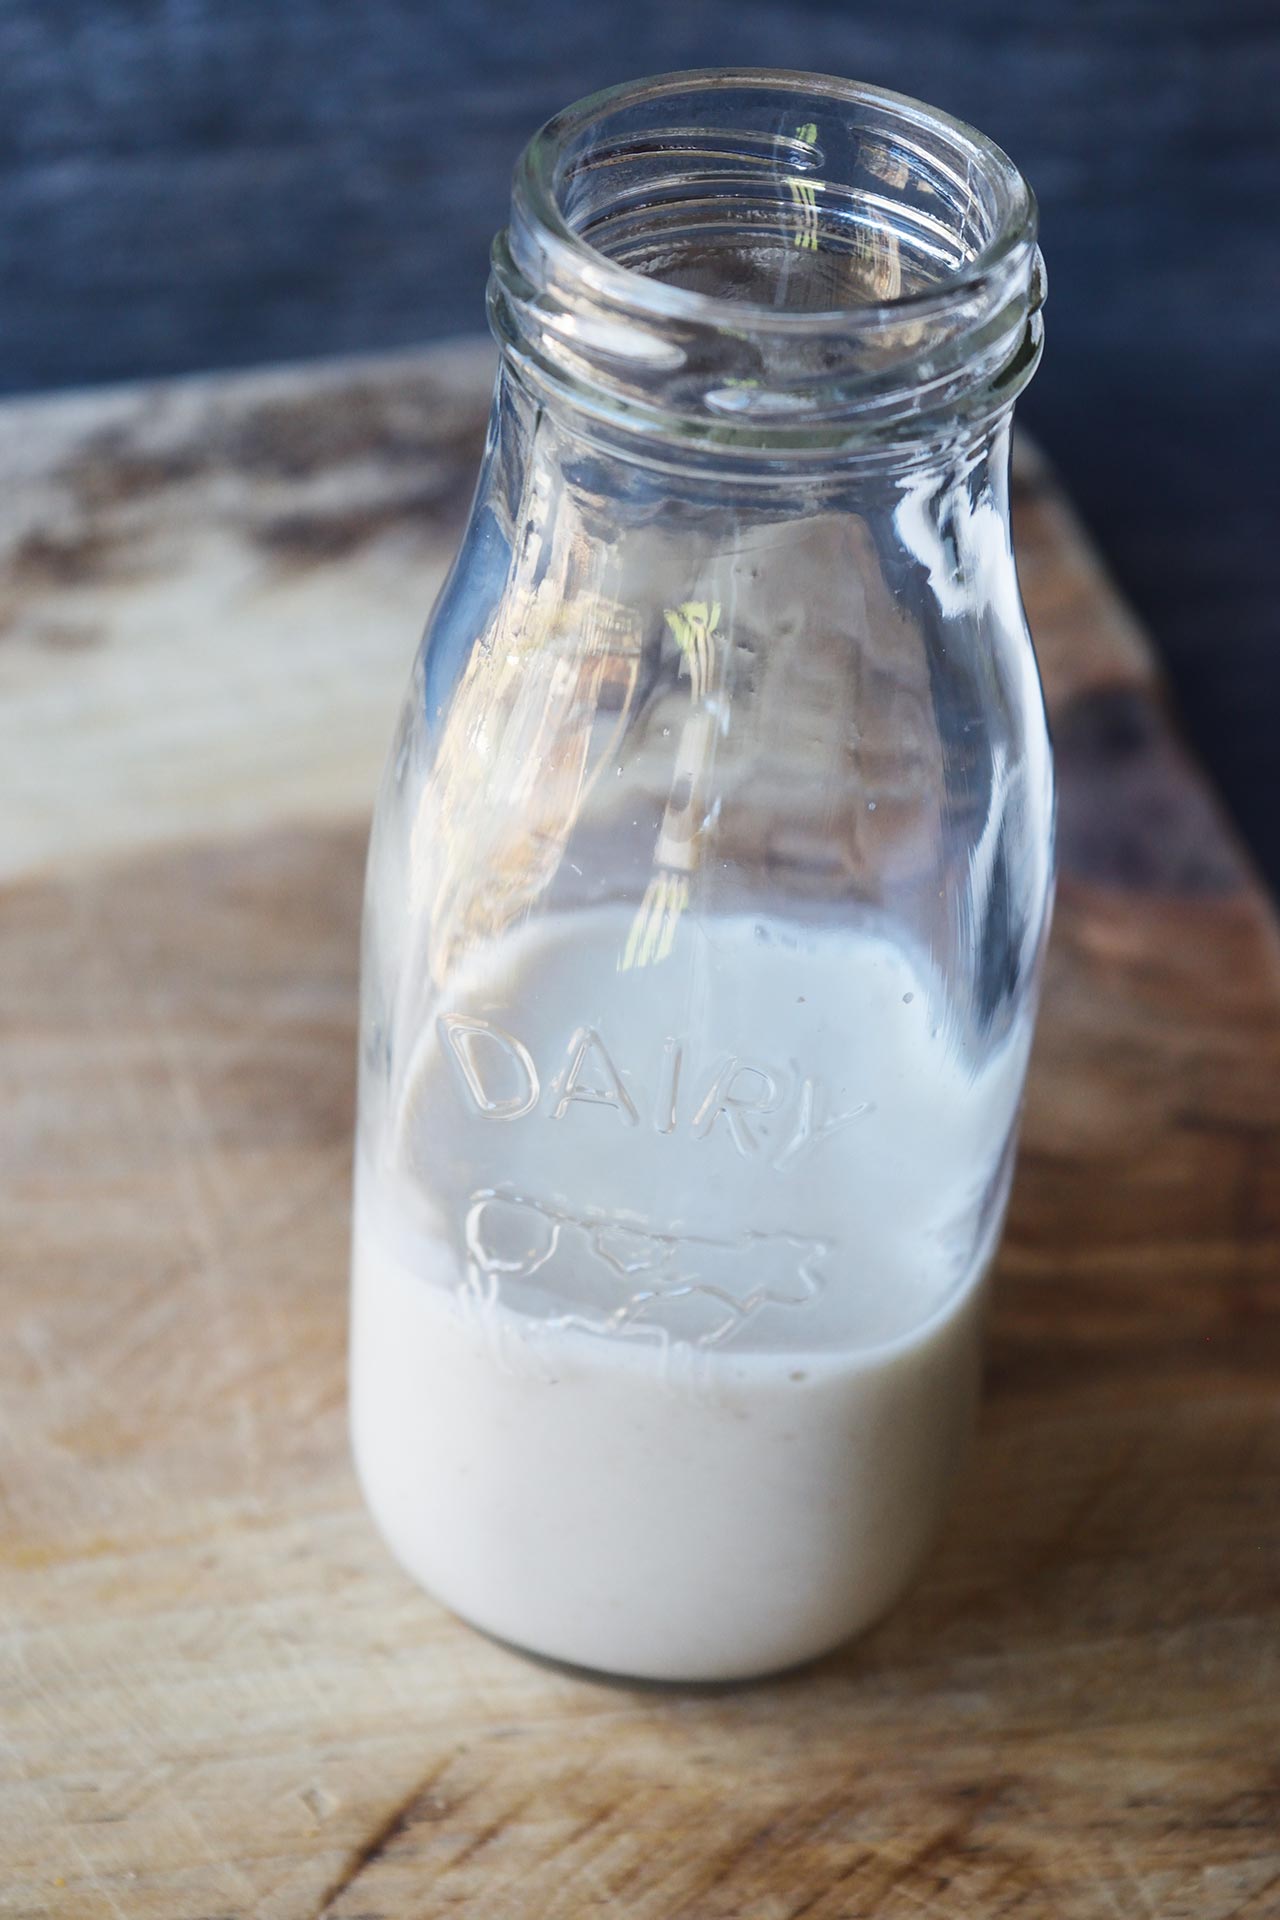 A side view of a glass jar filled with Condensed Milk.